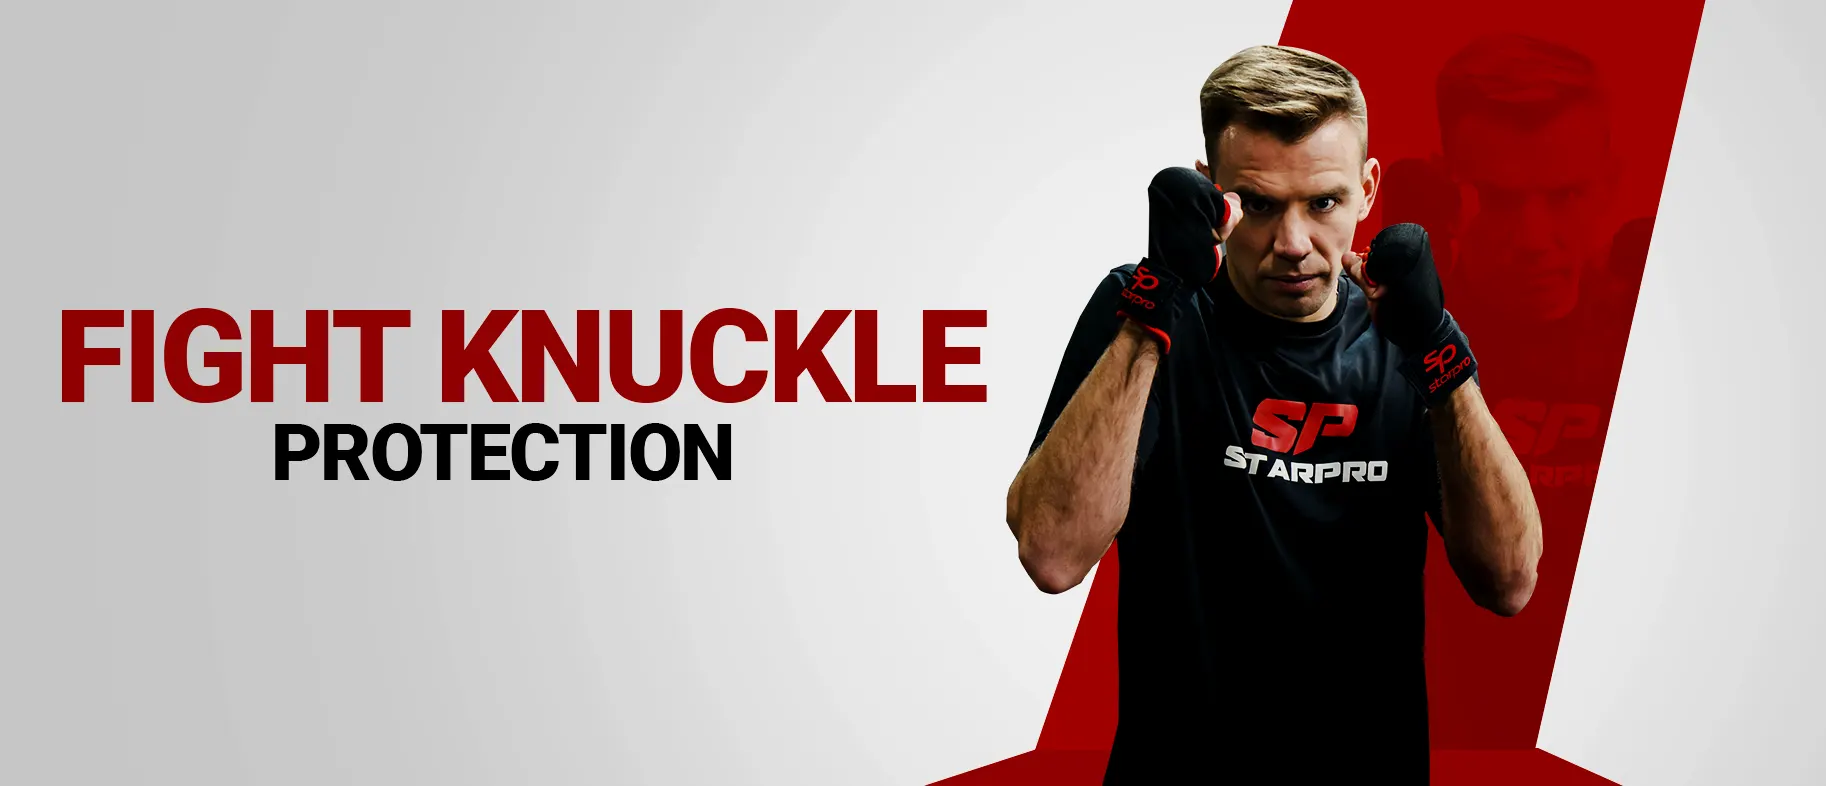 fight knuckle protection for safety | StarPro